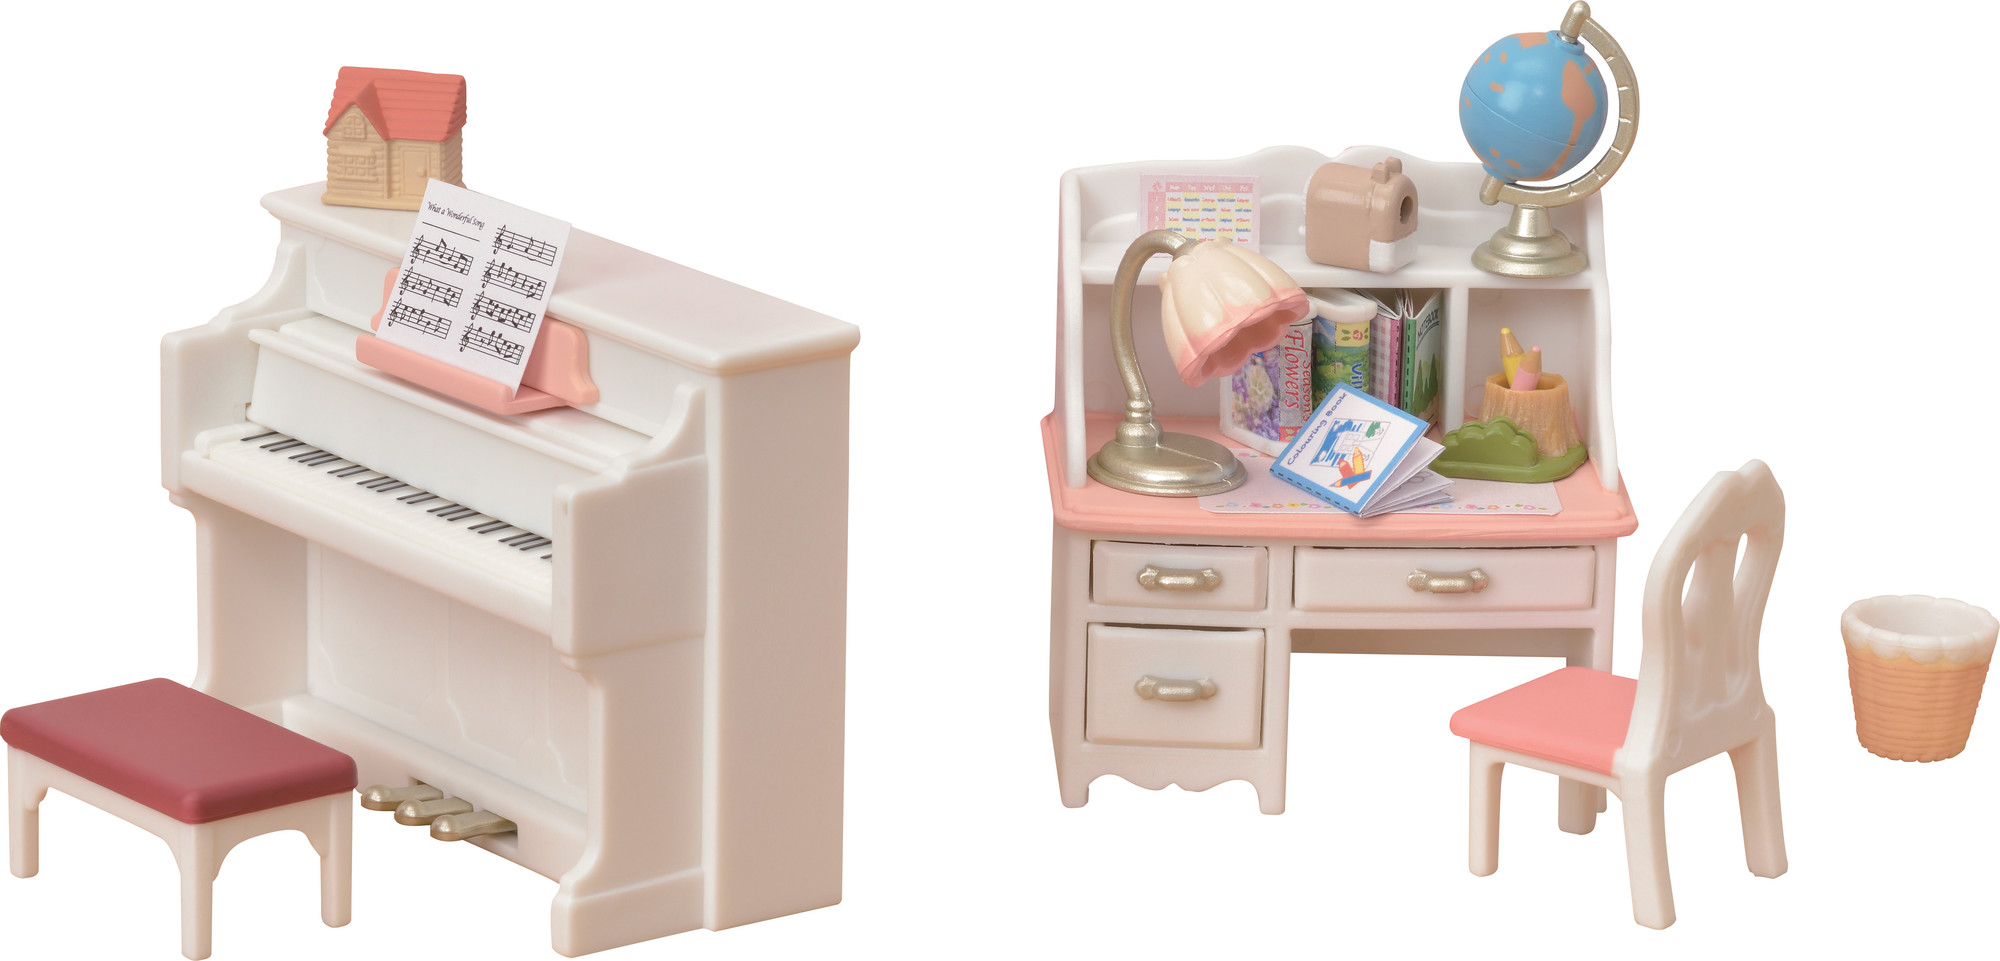 Calico Critters Piano and Desk Set and Accessories Dollhouse Furniture, 20 Pieces Included - image 1 of 1